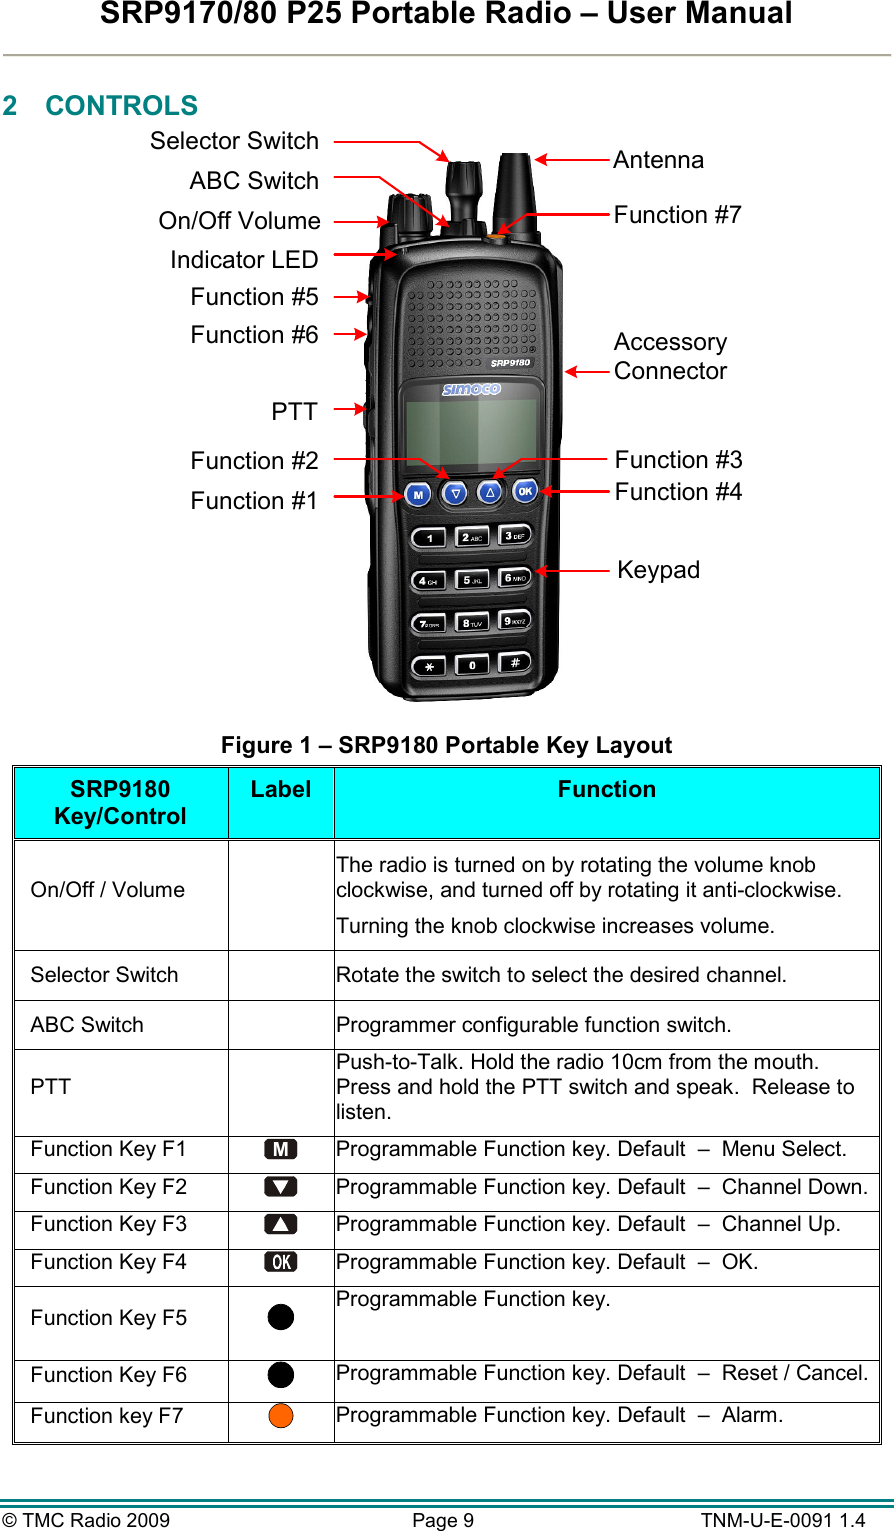 SRP9170/80 P25 Portable Radio – User Manual  © TMC Radio 2009  Page 9   TNM-U-E-0091 1.4 2  CONTROLS Accessory ConnectorFunction #7Selector SwitchABC SwitchOn/Off VolumePTTFunction #5Function #6Function #2Function #1Function #3Function #4AntennaKeypadIndicator LED Figure 1 – SRP9180 Portable Key Layout SRP9180 Key/Control Label  Function On/Off / Volume   The radio is turned on by rotating the volume knob clockwise, and turned off by rotating it anti-clockwise. Turning the knob clockwise increases volume. Selector Switch   Rotate the switch to select the desired channel. ABC Switch   Programmer configurable function switch. PTT   Push-to-Talk. Hold the radio 10cm from the mouth. Press and hold the PTT switch and speak.  Release to listen. Function Key F1 M Programmable Function key. Default  –  Menu Select. Function Key F2   Programmable Function key. Default  –  Channel Down. Function Key F3   Programmable Function key. Default  –  Channel Up. Function Key F4   Programmable Function key. Default  –  OK. Function Key F5   Programmable Function key.  Function Key F6   Programmable Function key. Default  –  Reset / Cancel. Function key F7   Programmable Function key. Default  –  Alarm. 